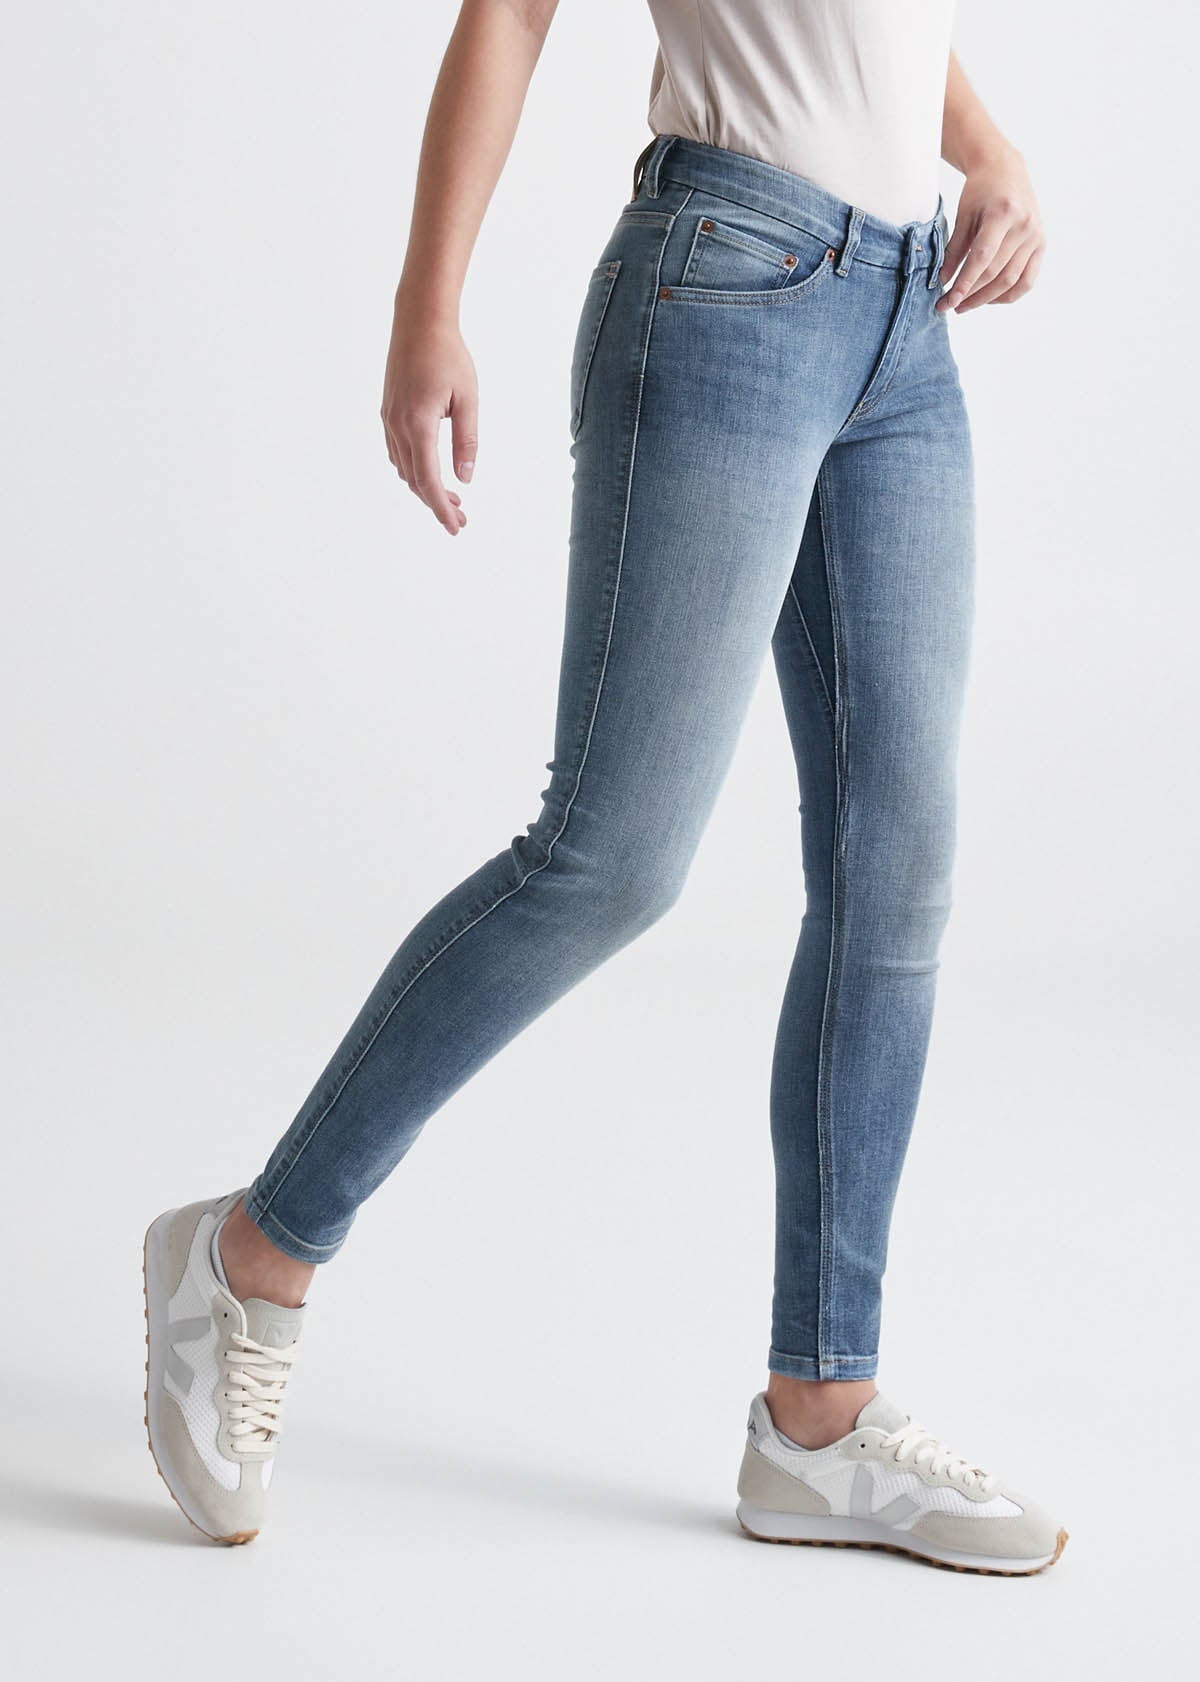 Jeans for Women, Slim, Stretch & More